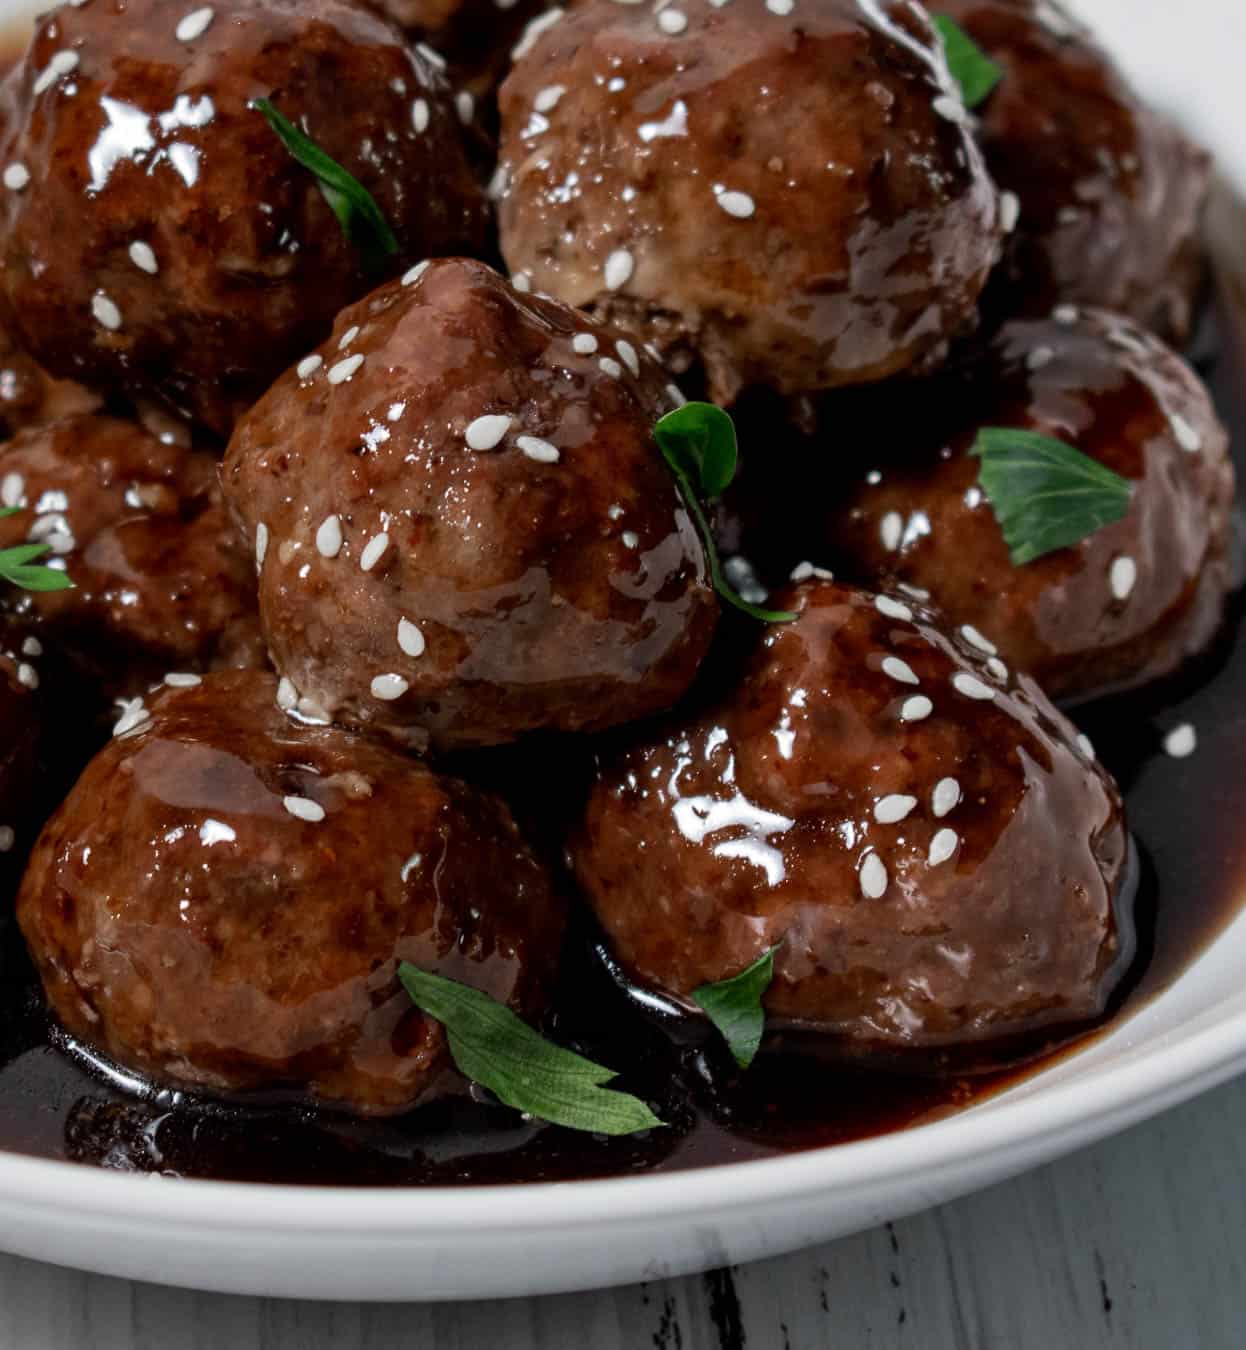 Sticky Asian meatballs recipe | Gluten-free, Dairy-Free and Whole30 compliant